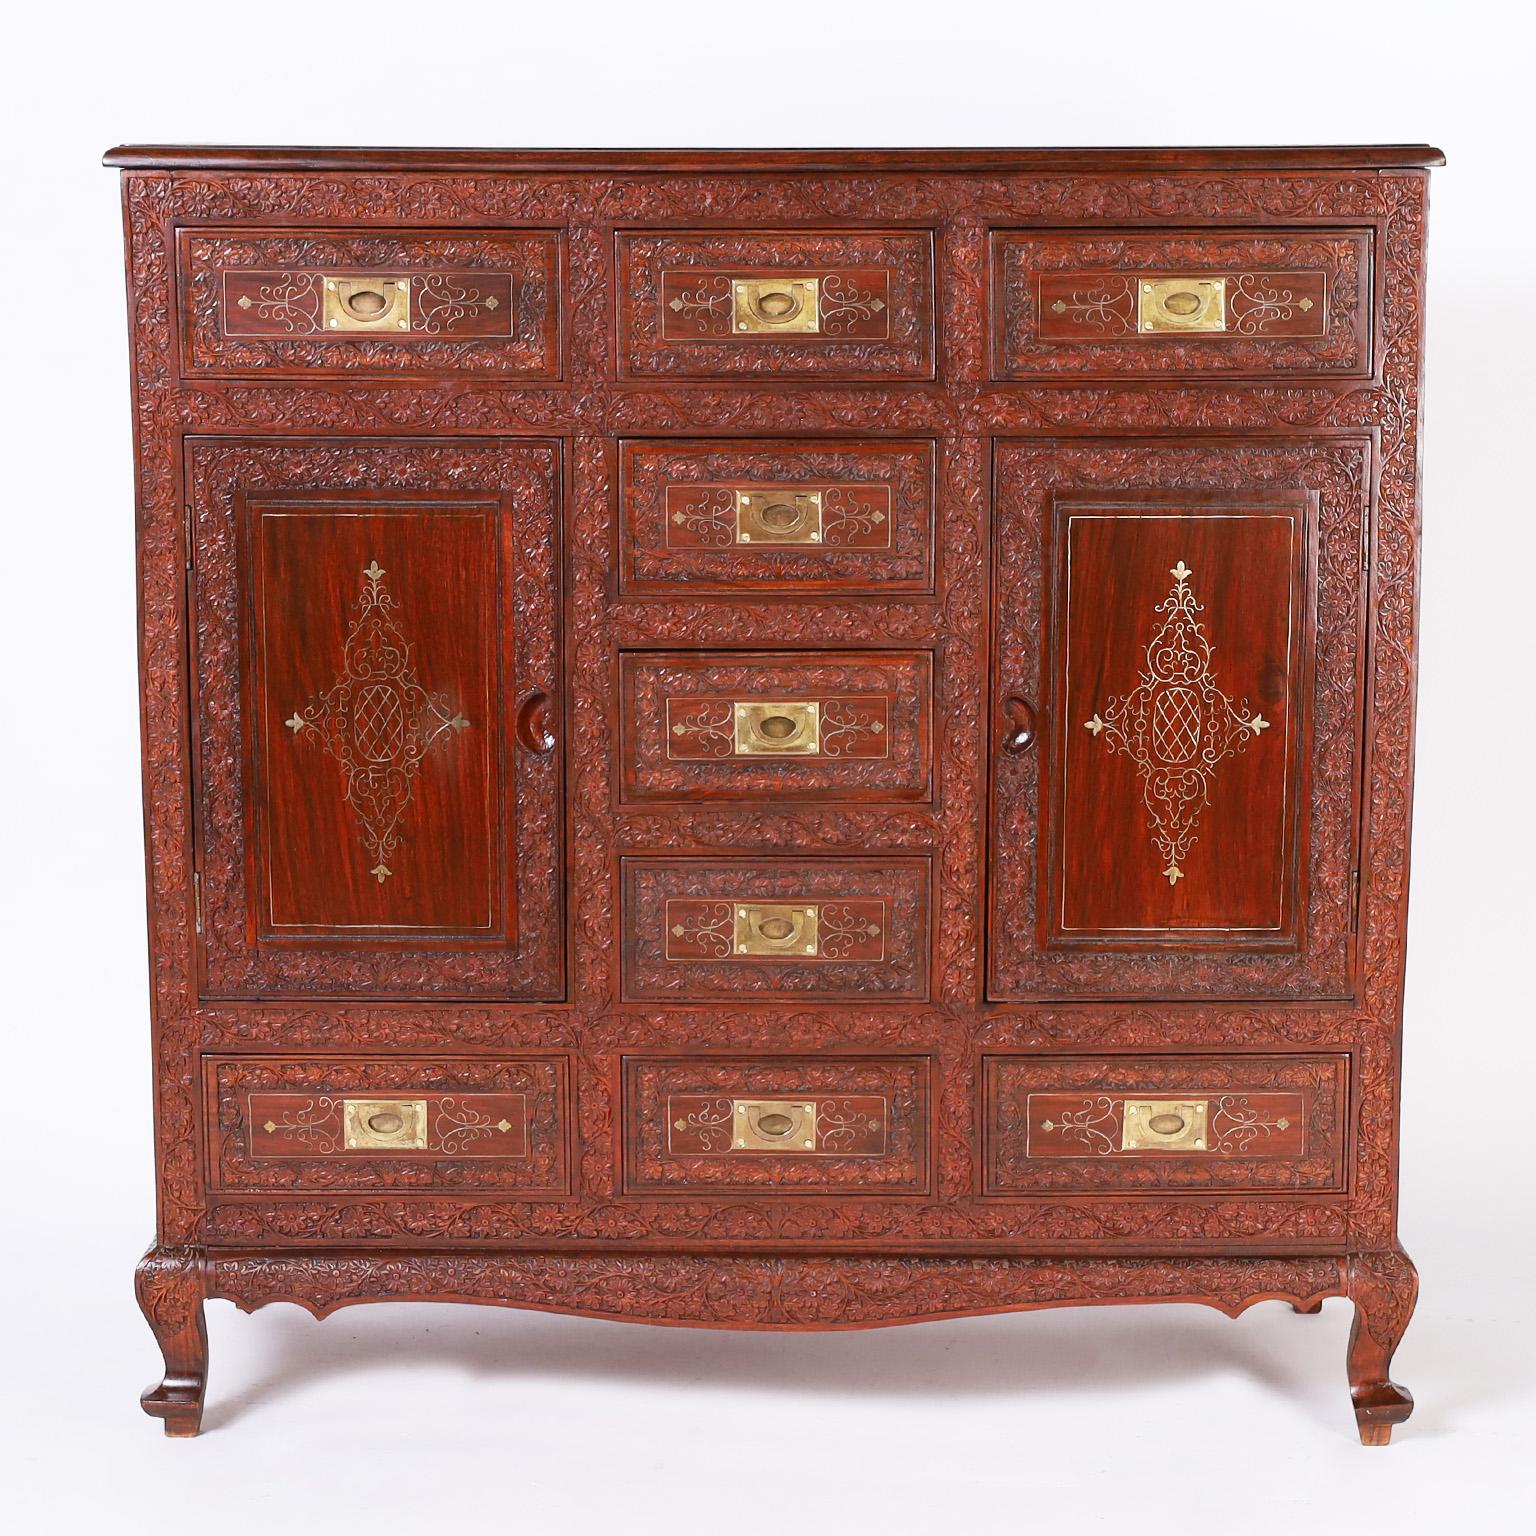 Antique Anglo Indian chest with nine drawers and two doors expertly crafted in well grained rosewood with all the bells and whistles, featuring ambitious floral carvings throughout, delicate floral brass string inlays on the top, sides, and front,